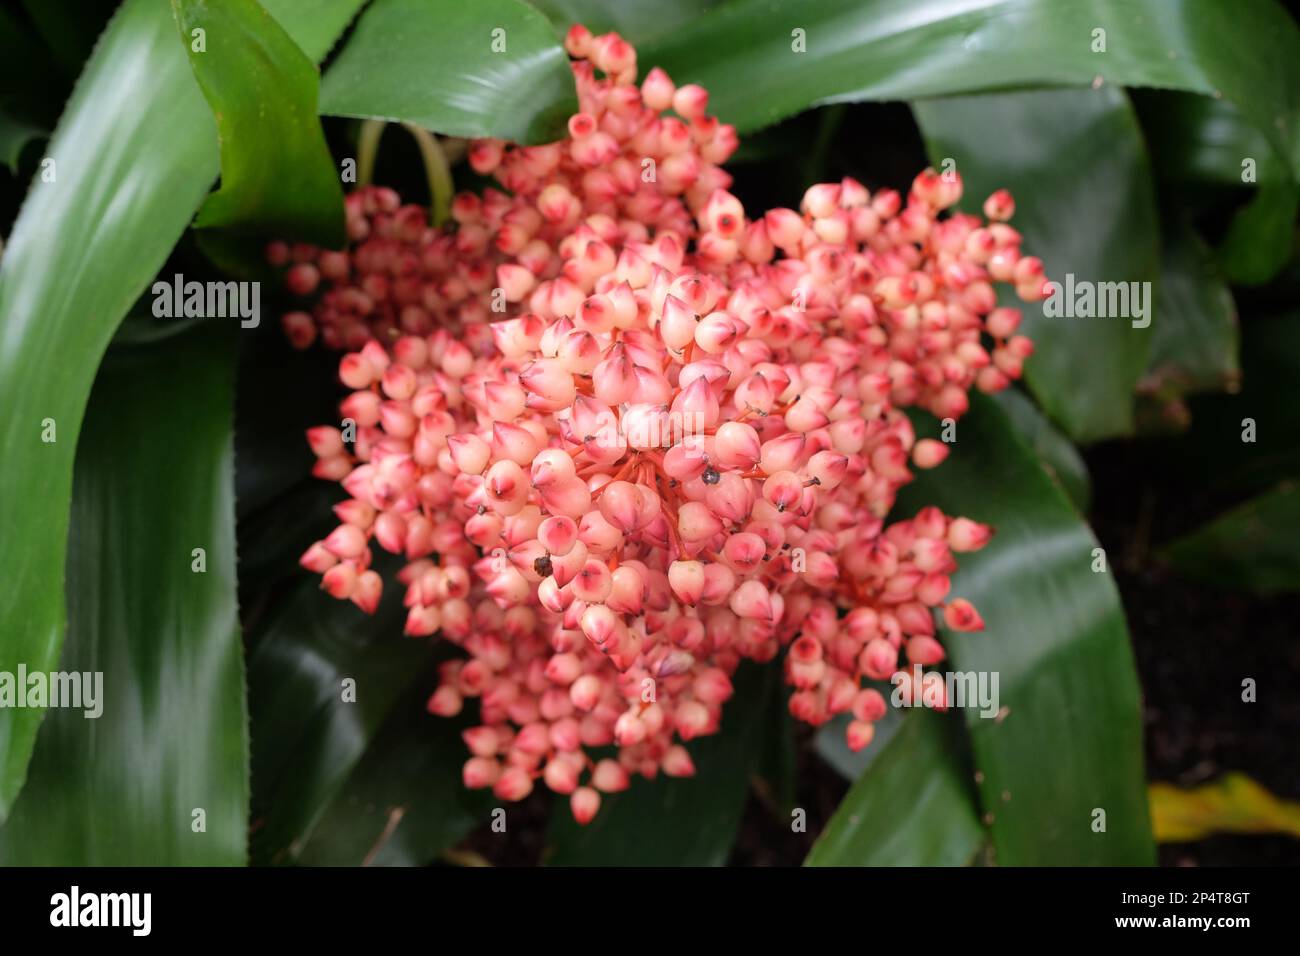 The pink berries of the Aechmea ramosa plant. Stock Photo